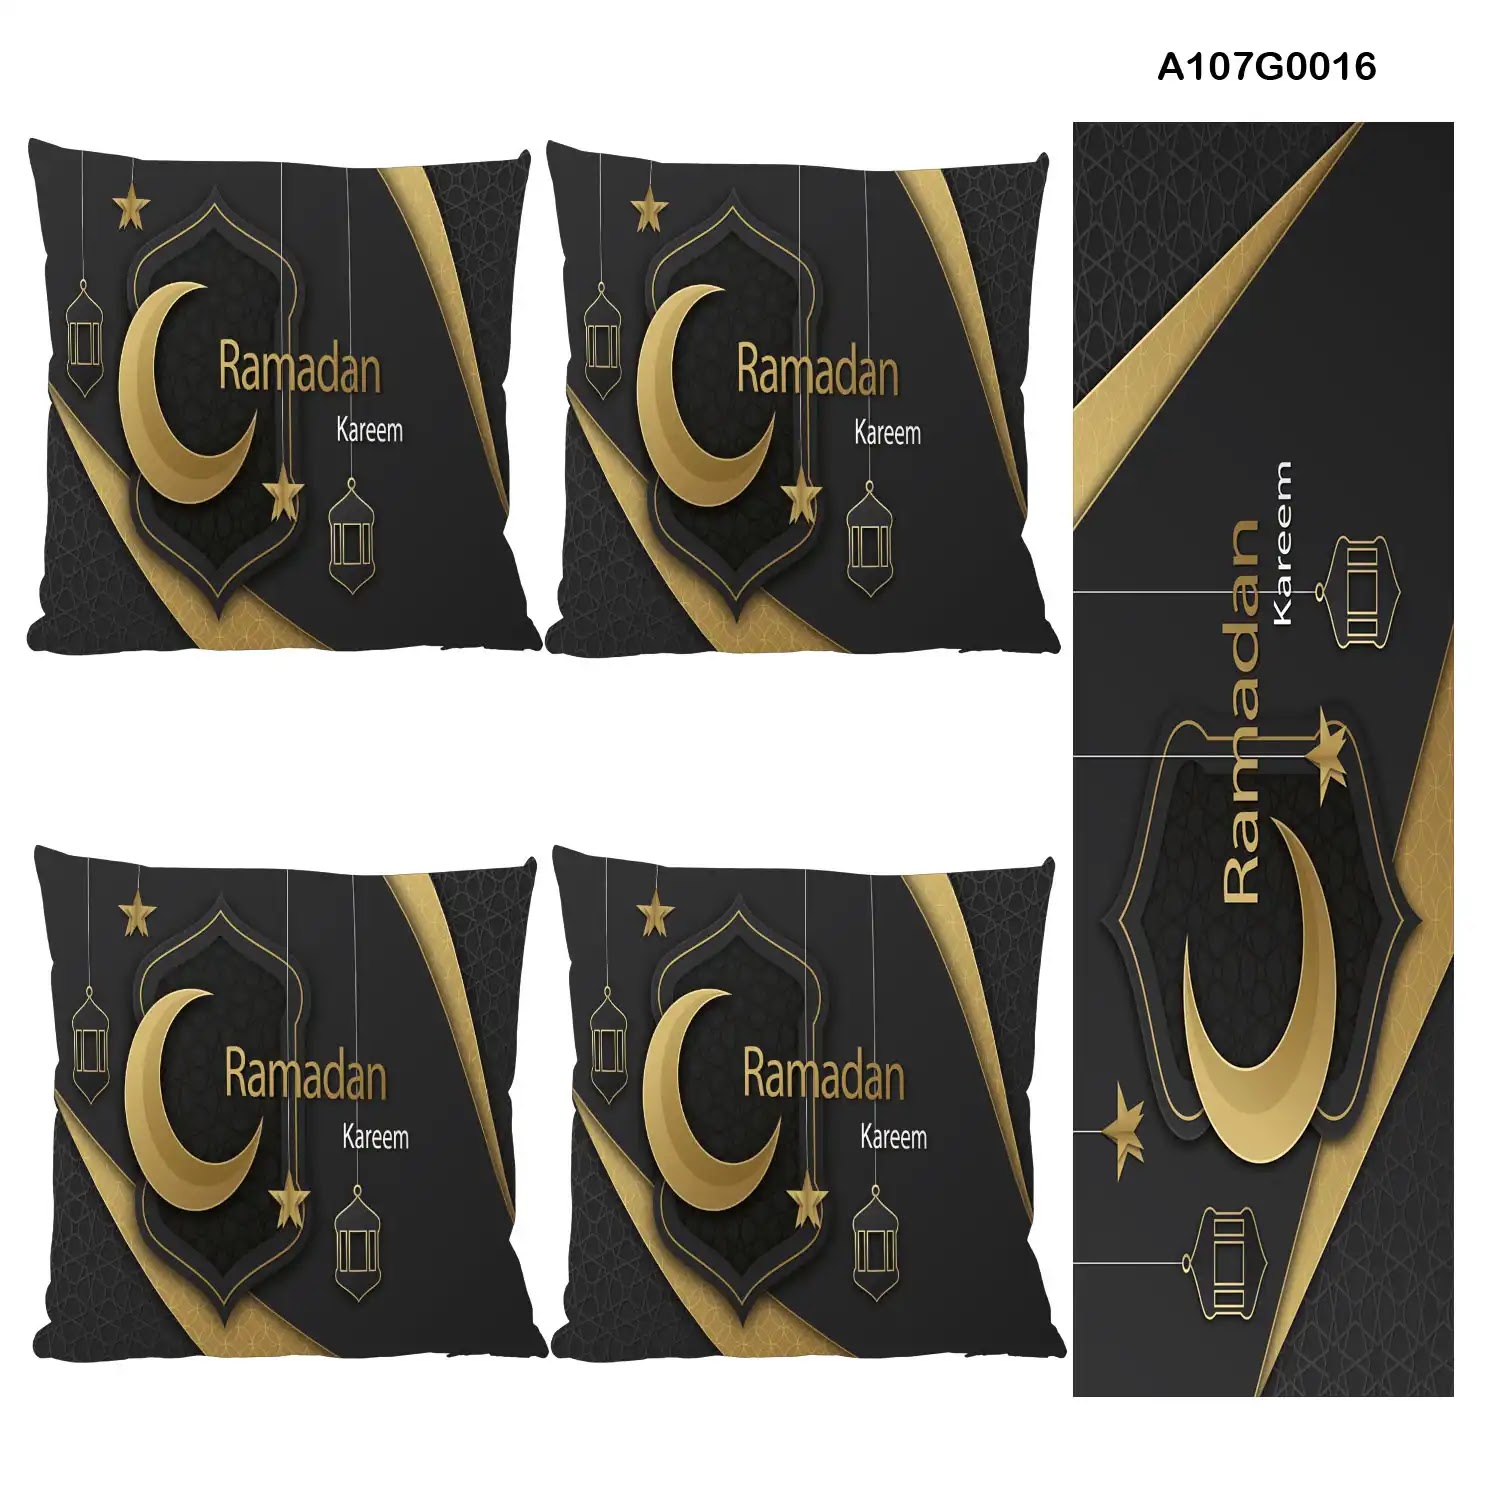 Black and gold Pillow cover set & table runner for Ramadan